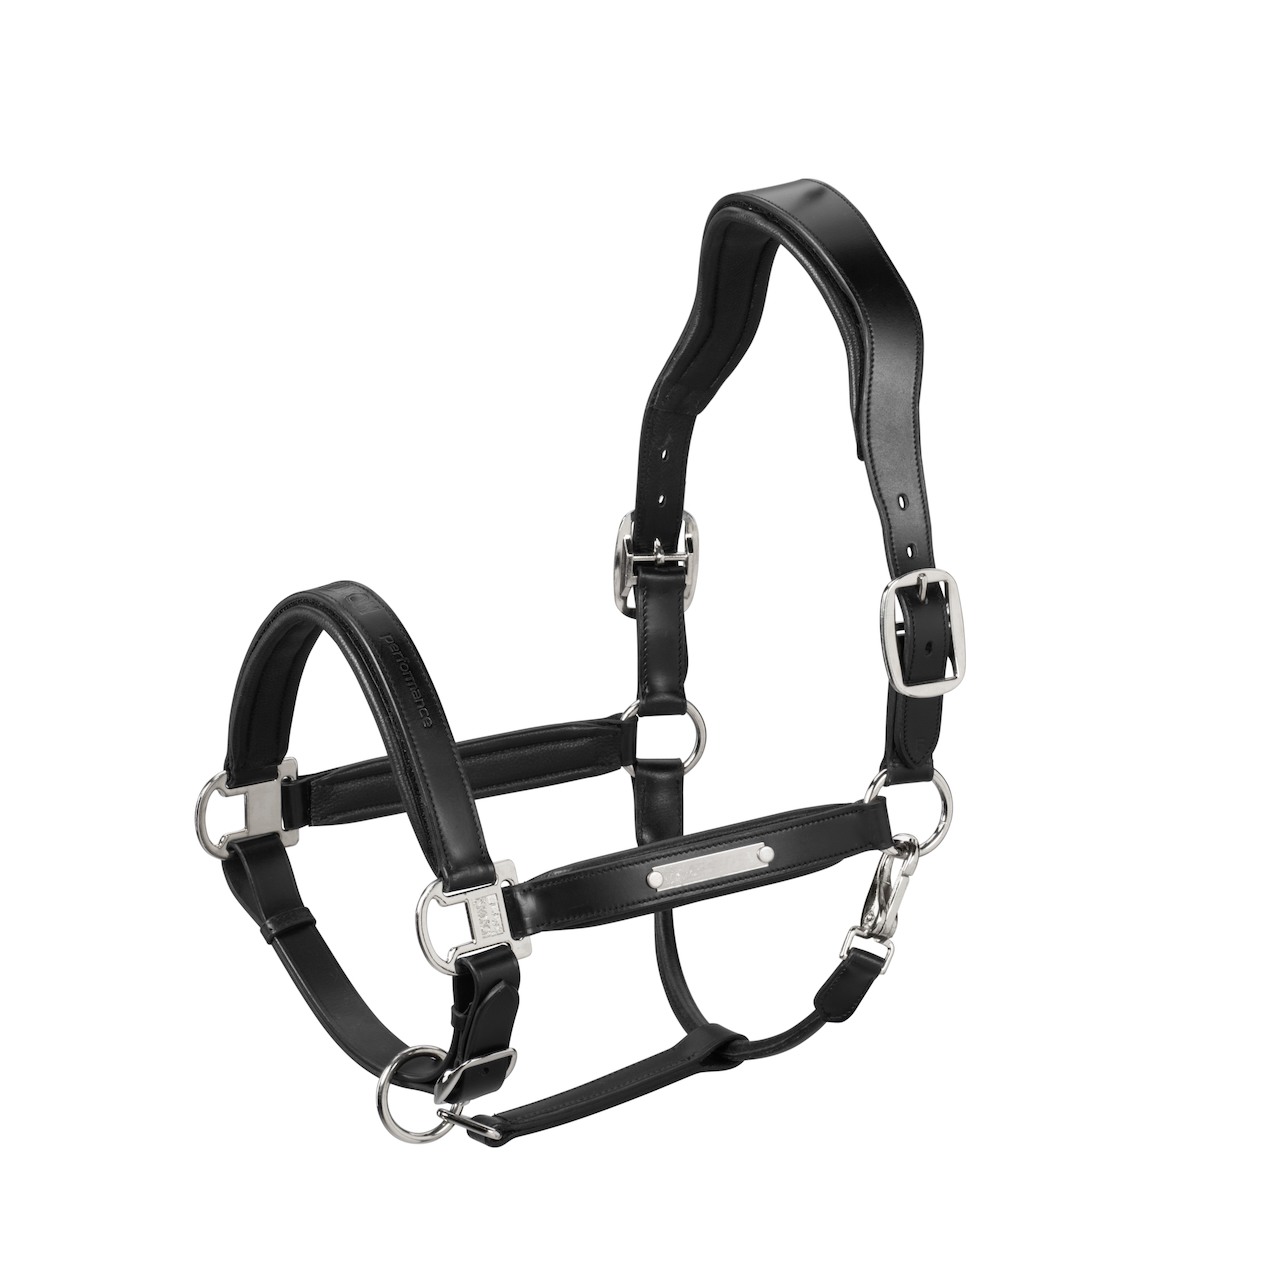 Classics Sports" halter with thorn buckle, brown